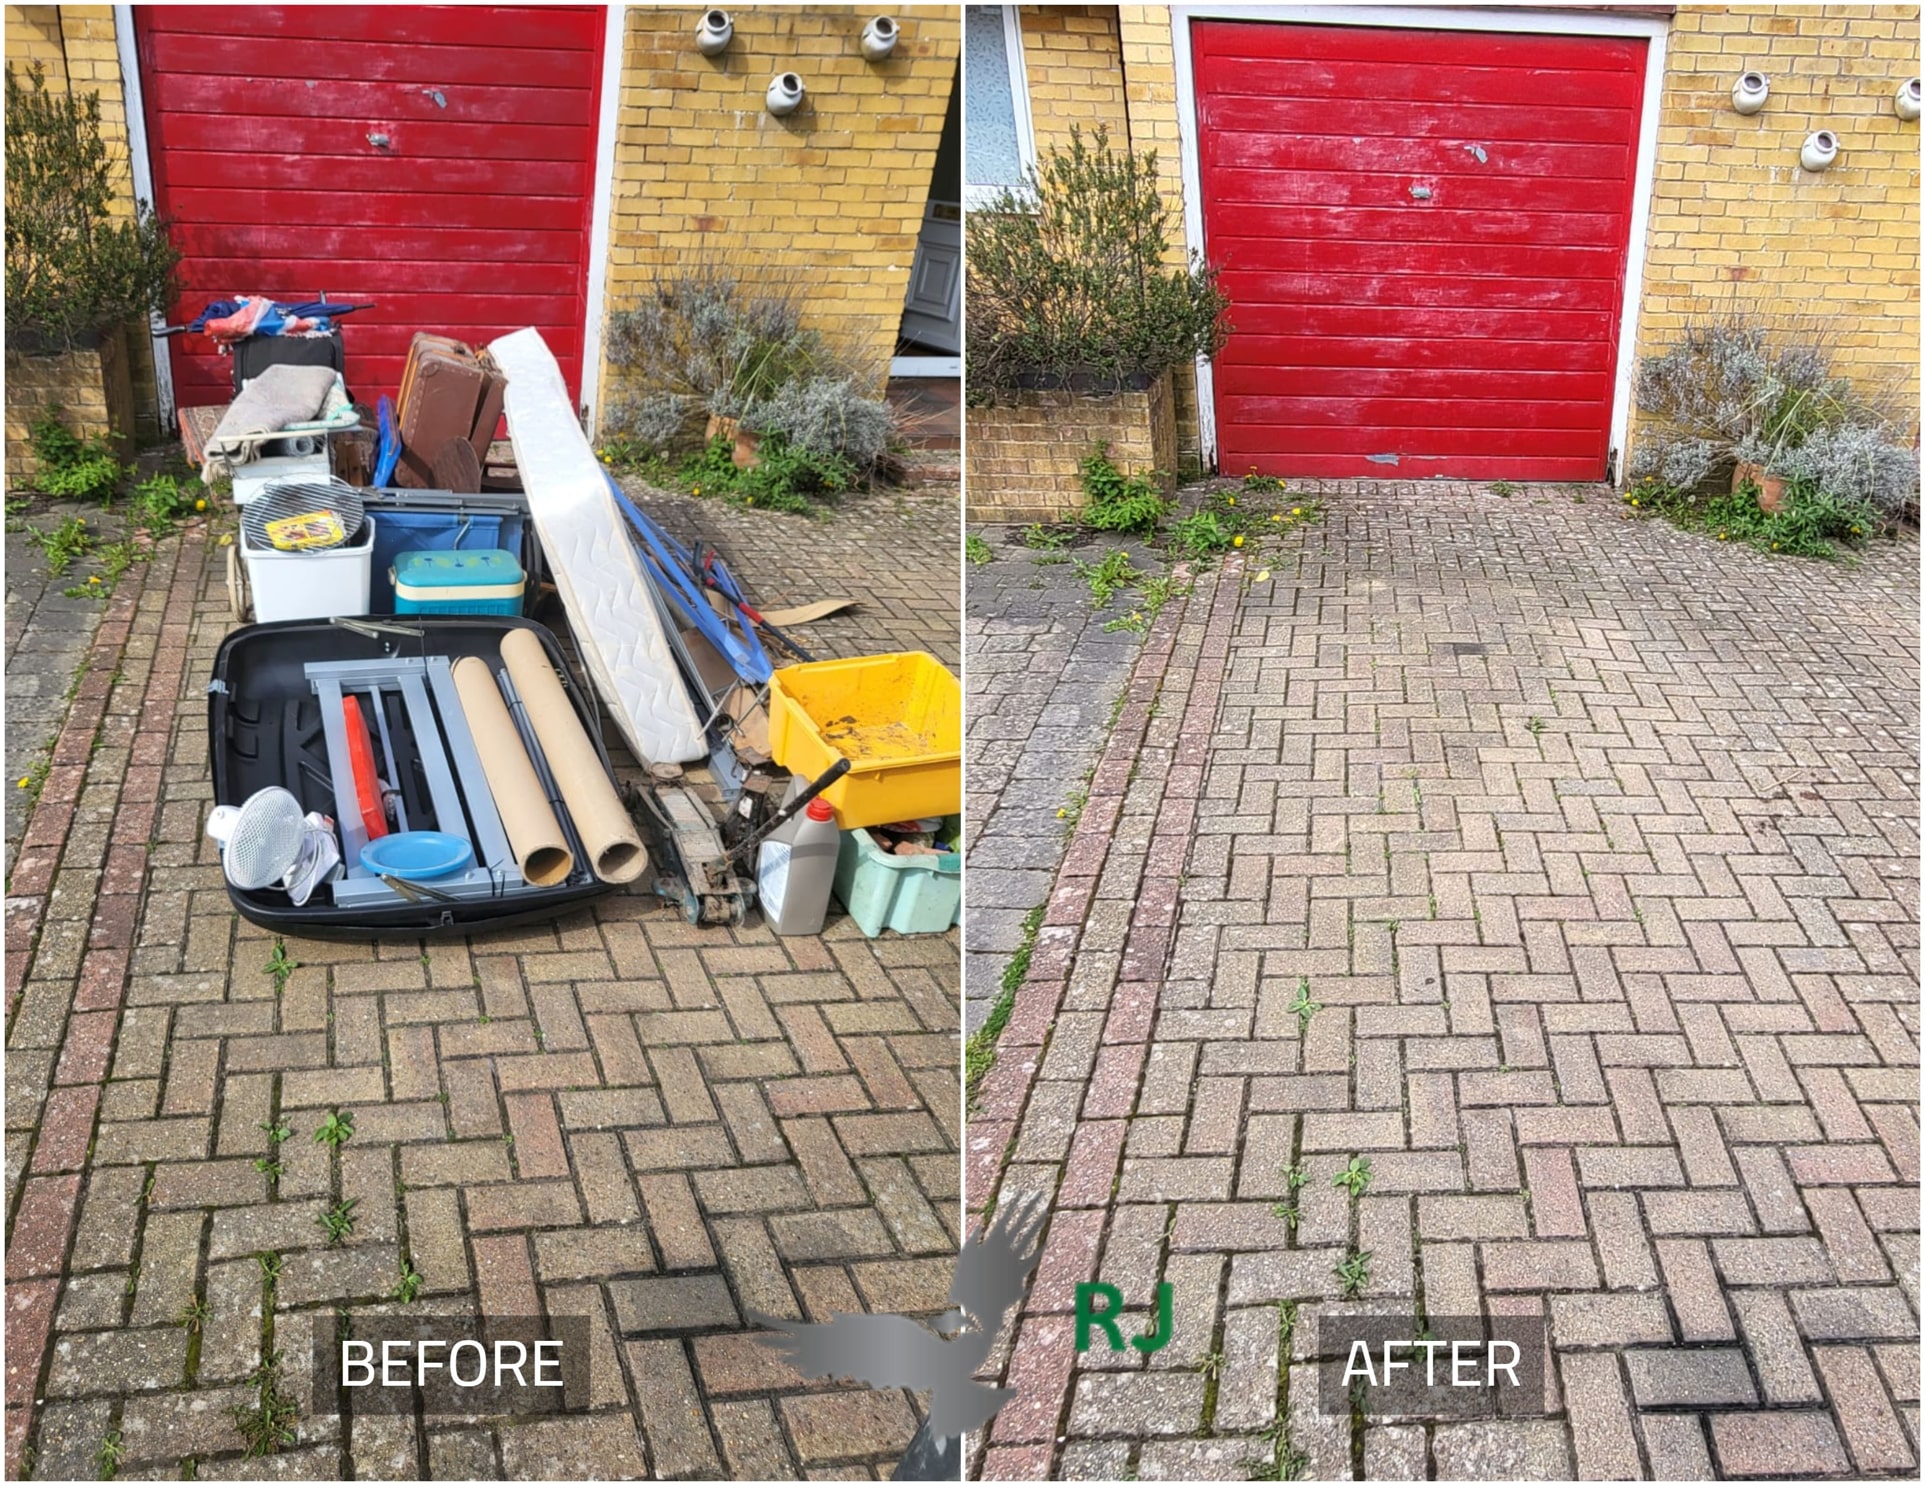 Professional Waste Clearance In West Wickham And Surrounding Areas